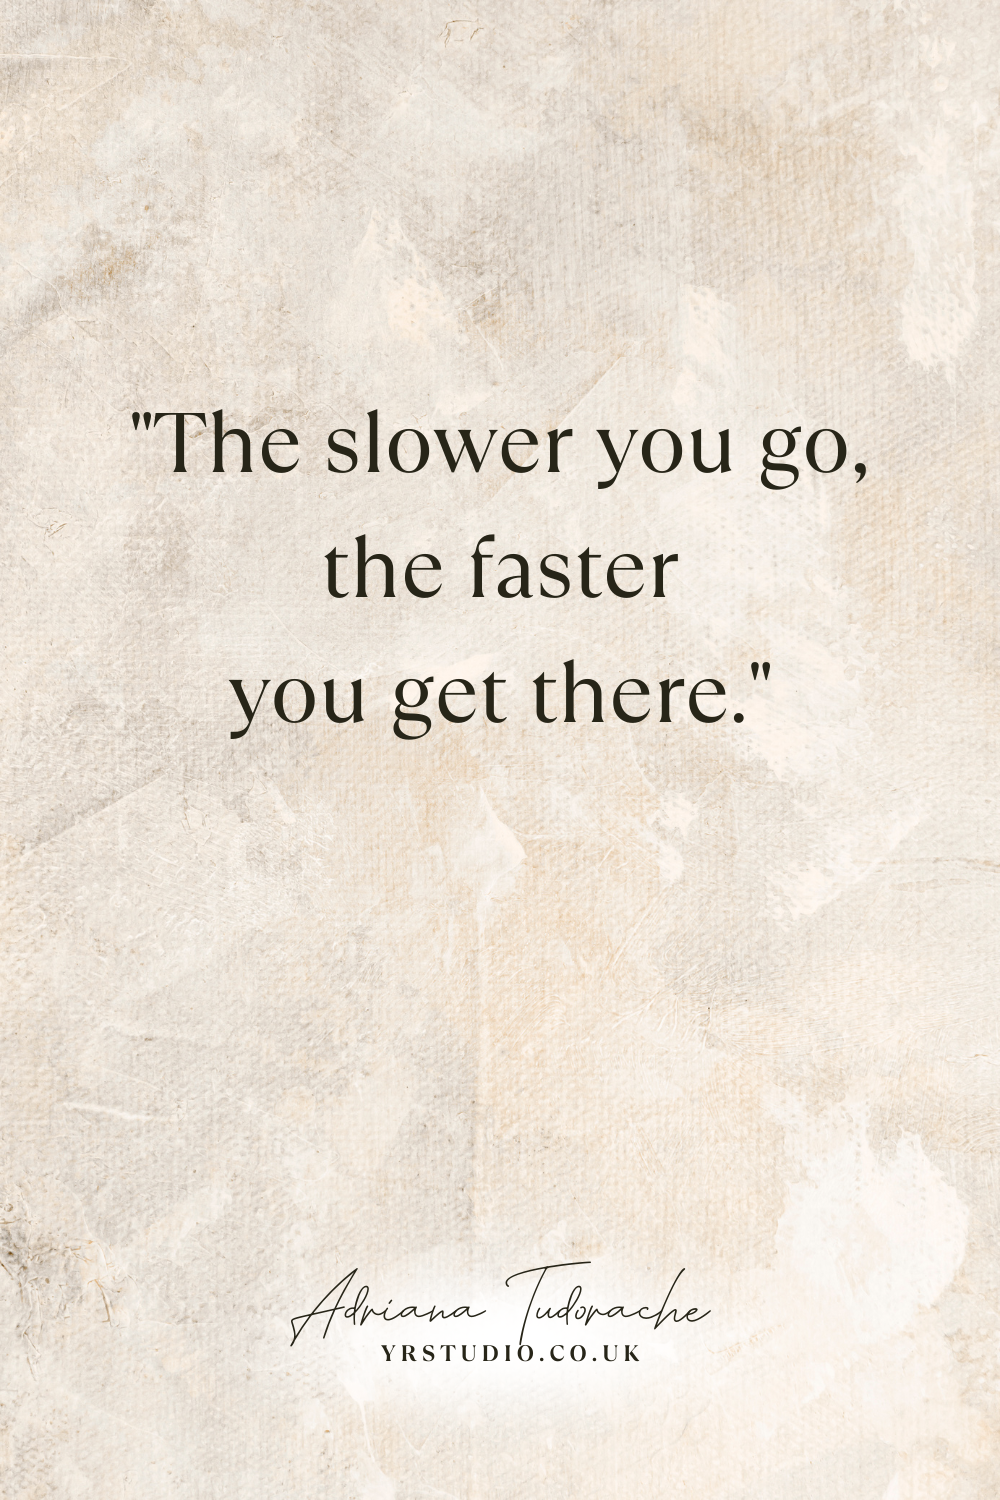 "The slower you go, the faster you get there."